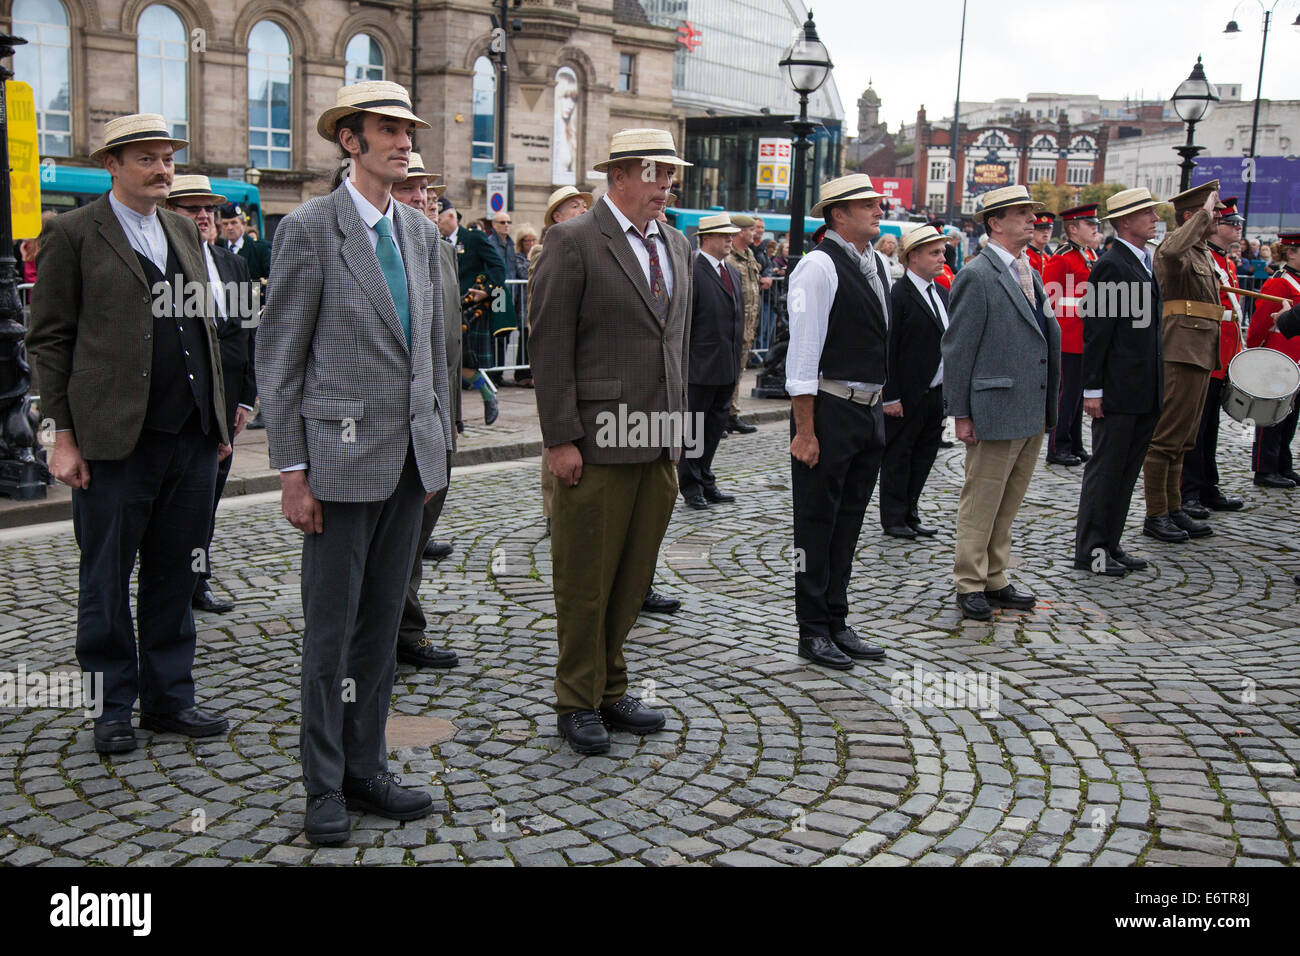 Liverpool, Merseyside, UK 31st August, 2014. Civilian volunteers in their famous straw boaters, enlist, join, recruit, man, enlistment, recruitment, symbol, uniform, white, isolated, recruiting, icon, soldier, business, military, enroll, & waiting to enlist as Prince Edward visits The Liverpool Pals commemoration and the re-enactment of the Liverpool Pals signing up to answer Lord Derby's call for recruits 100 years to the day it happened. Liverpool's success prompted other towns to form units, with civic pride and community spirit driving a competition to raise the highest numbers. Stock Photo